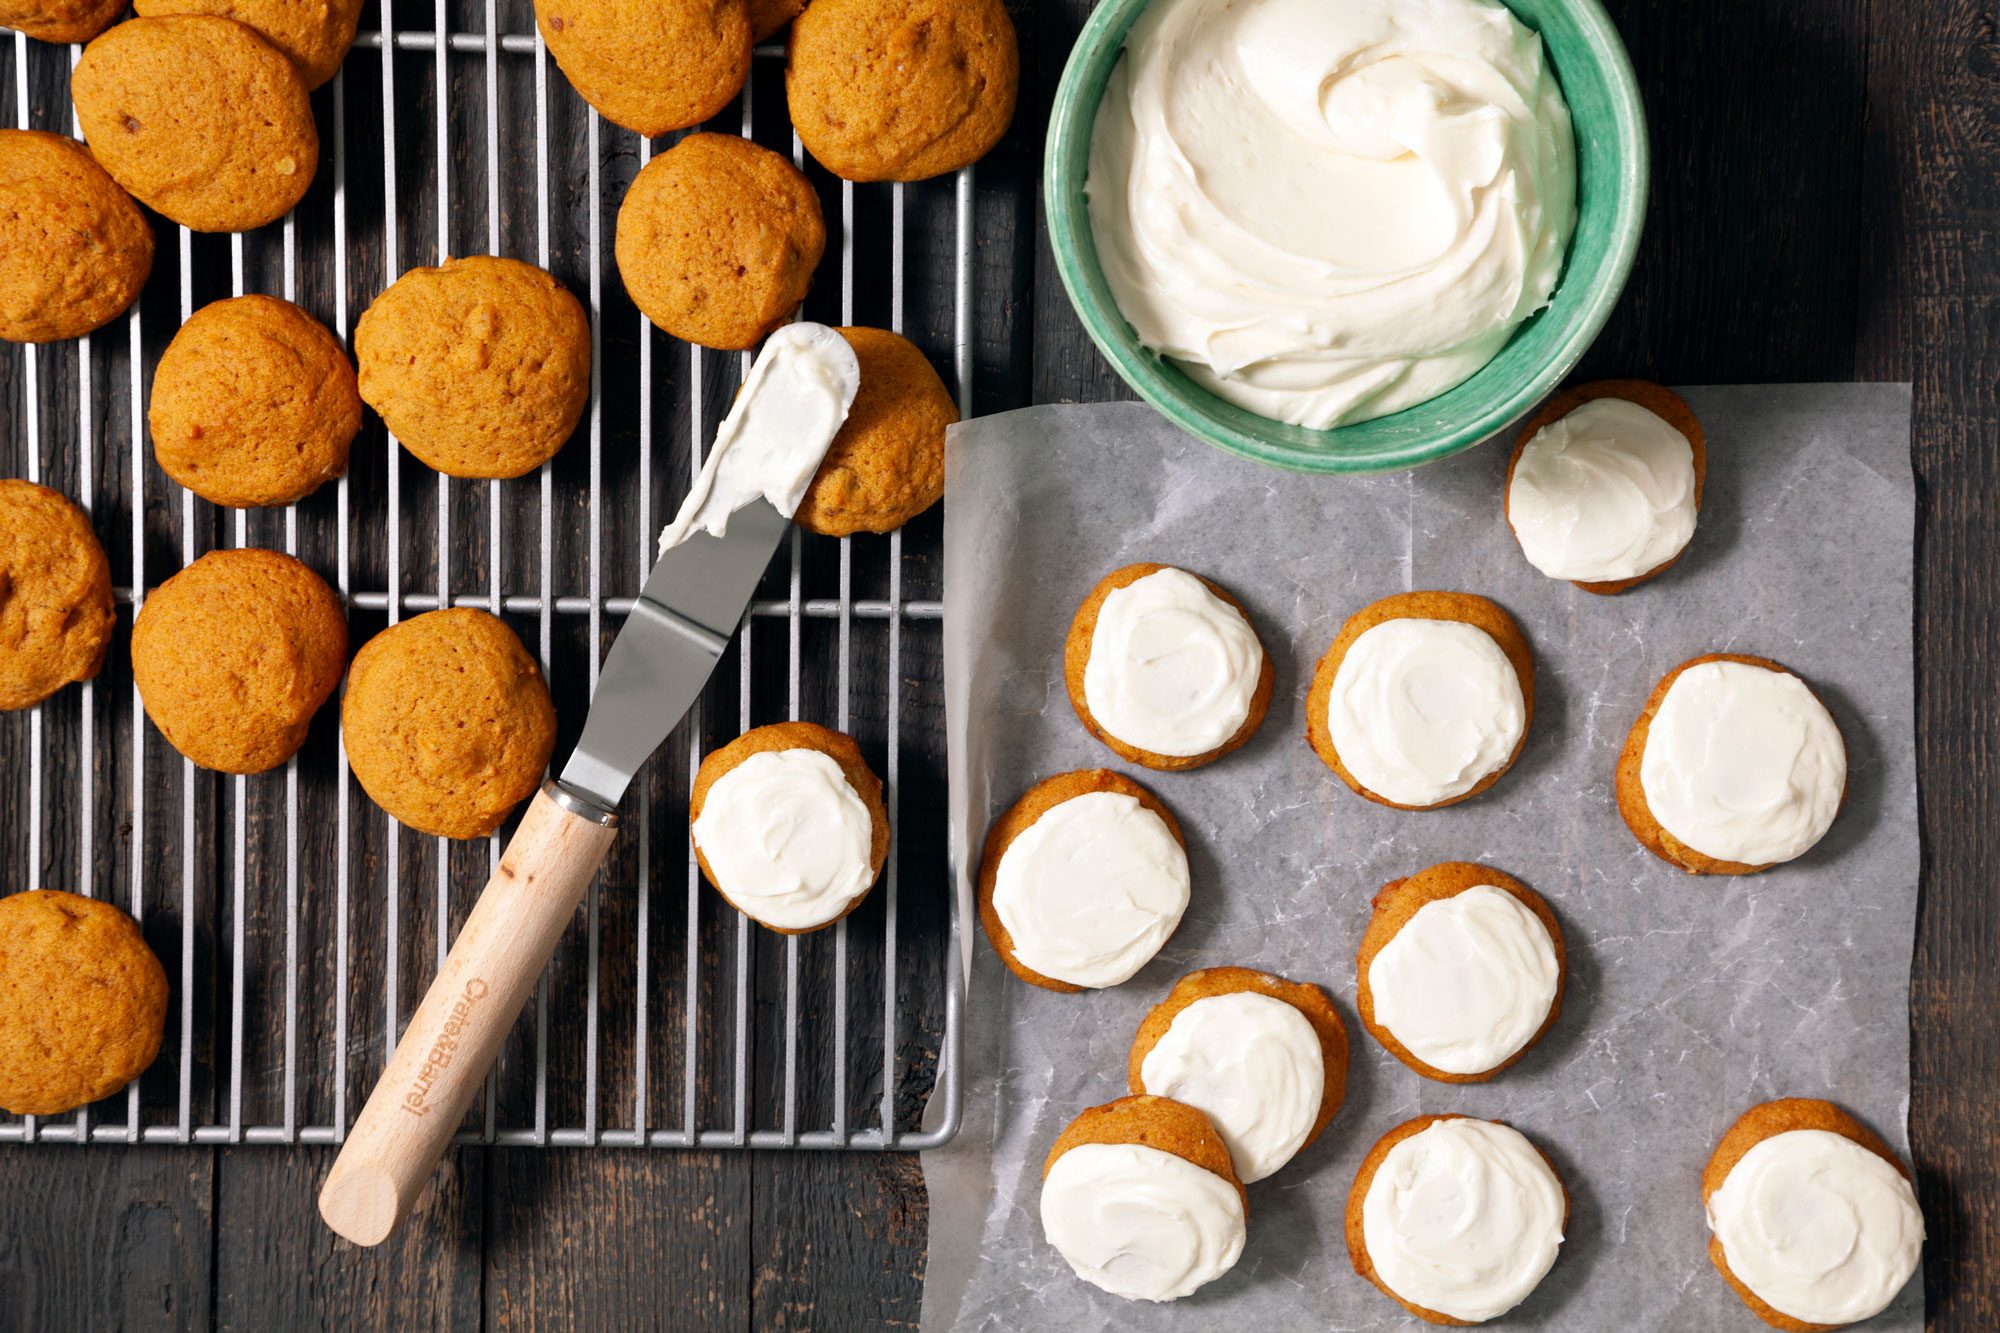 Pumpkin Cookies with a knife on wire rack; Pumpkin Cookies With Cream Cheese Frosting on baking paper on wooden surface